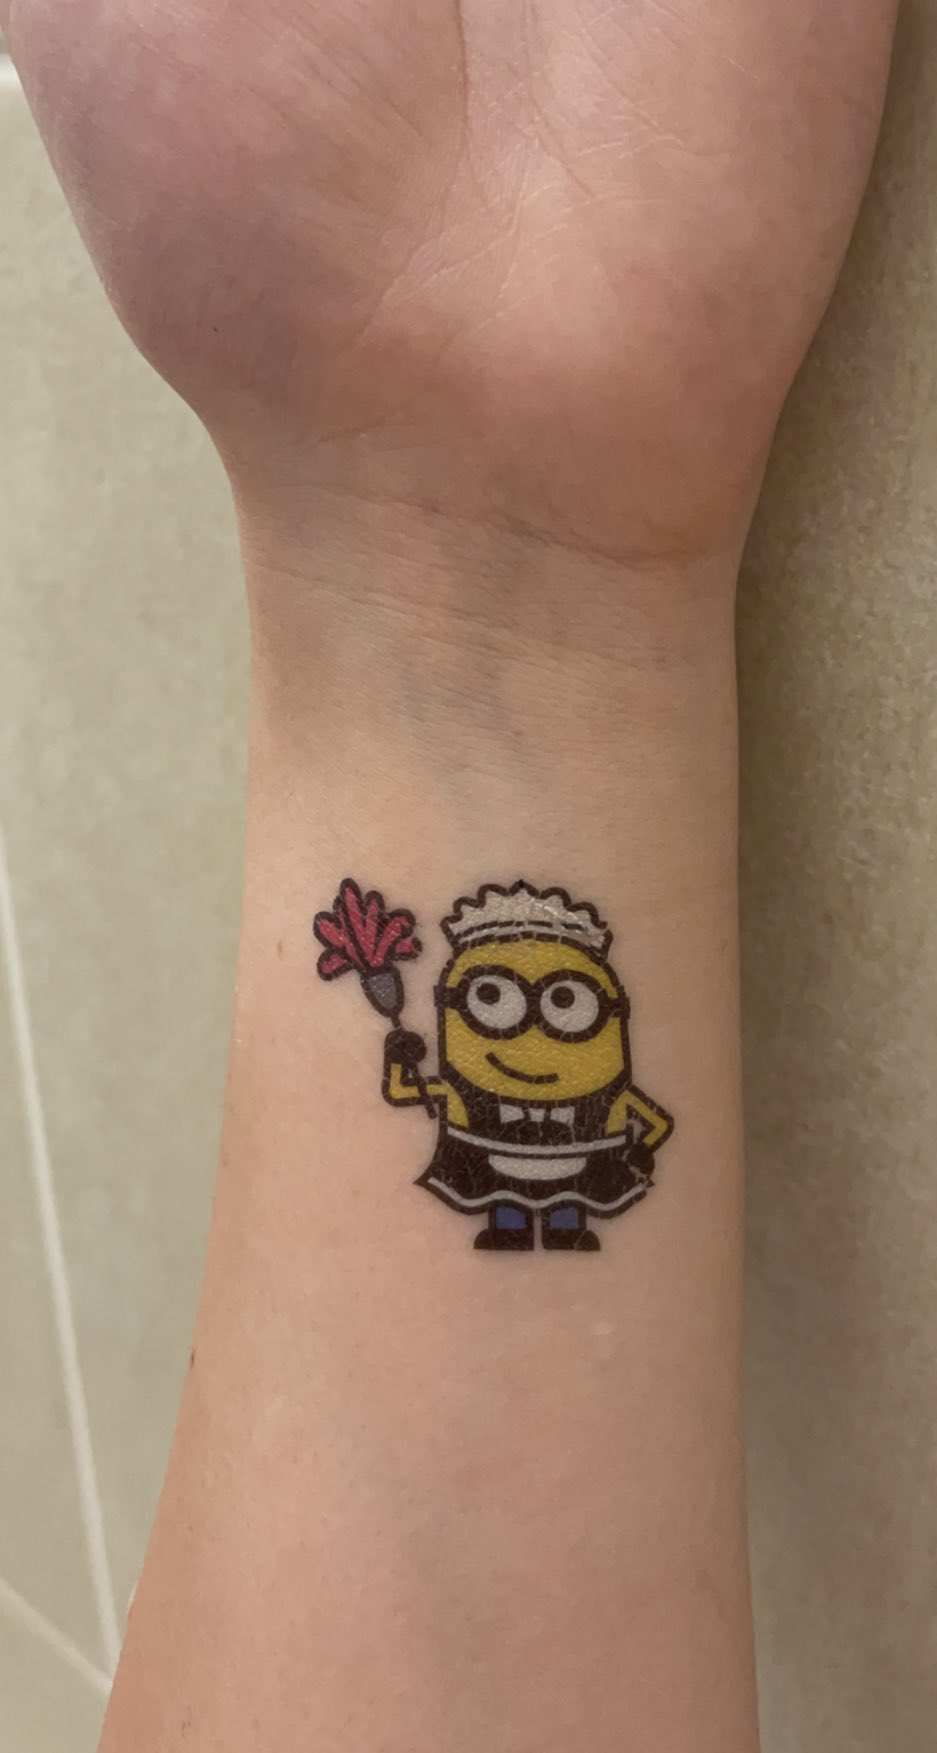 37 Minion Tattoos That You'll Never Be Able To Unsee